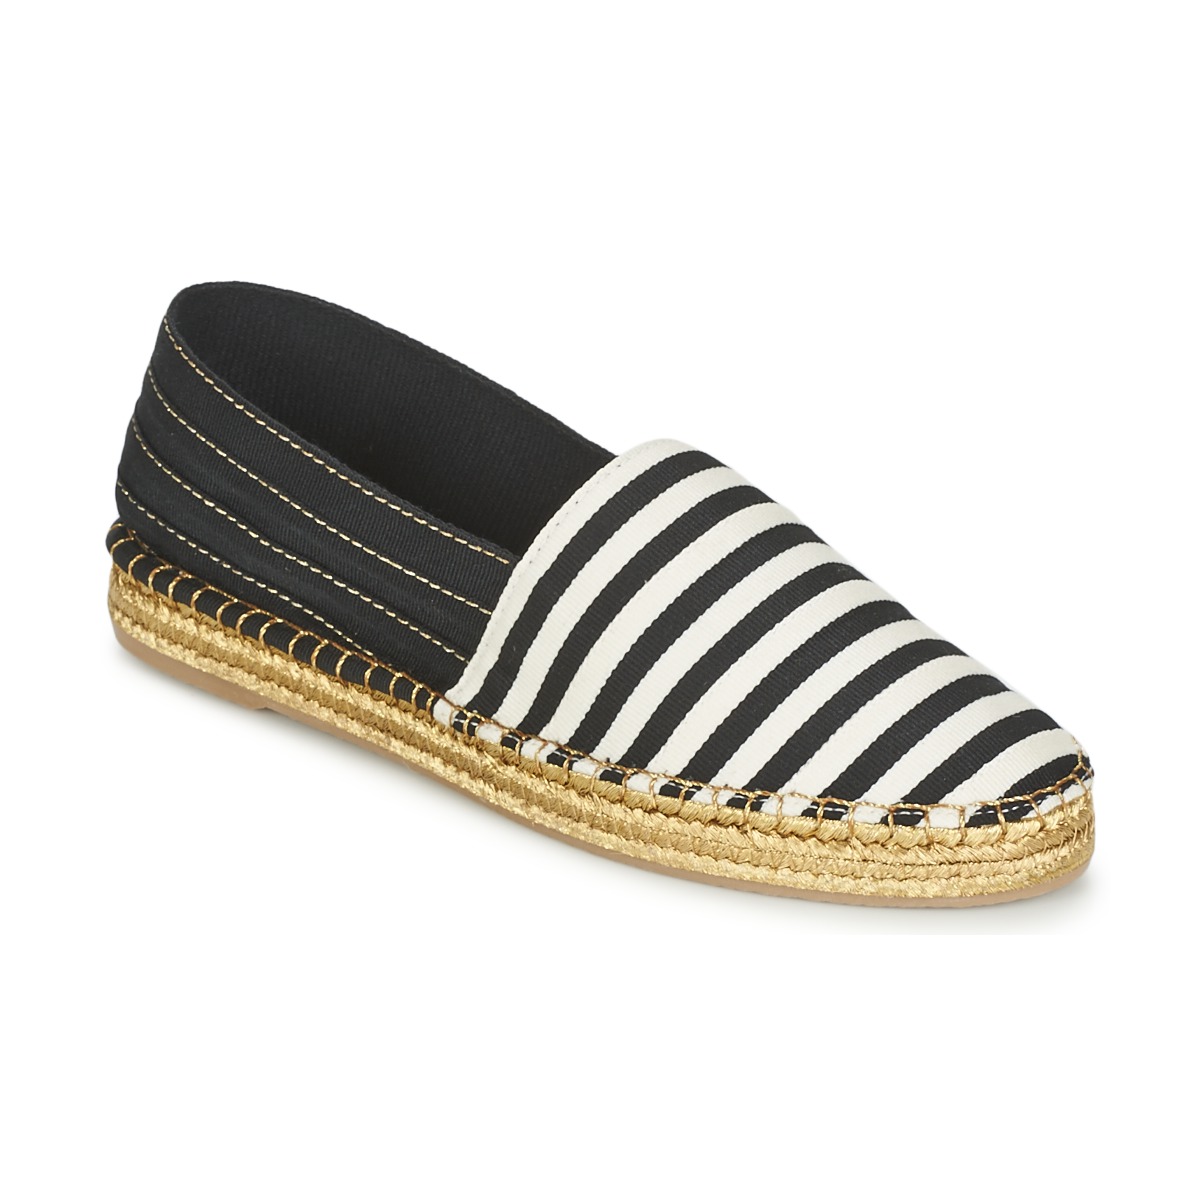 marc jacobs  sienna  women's espadrilles / casual shoes in black